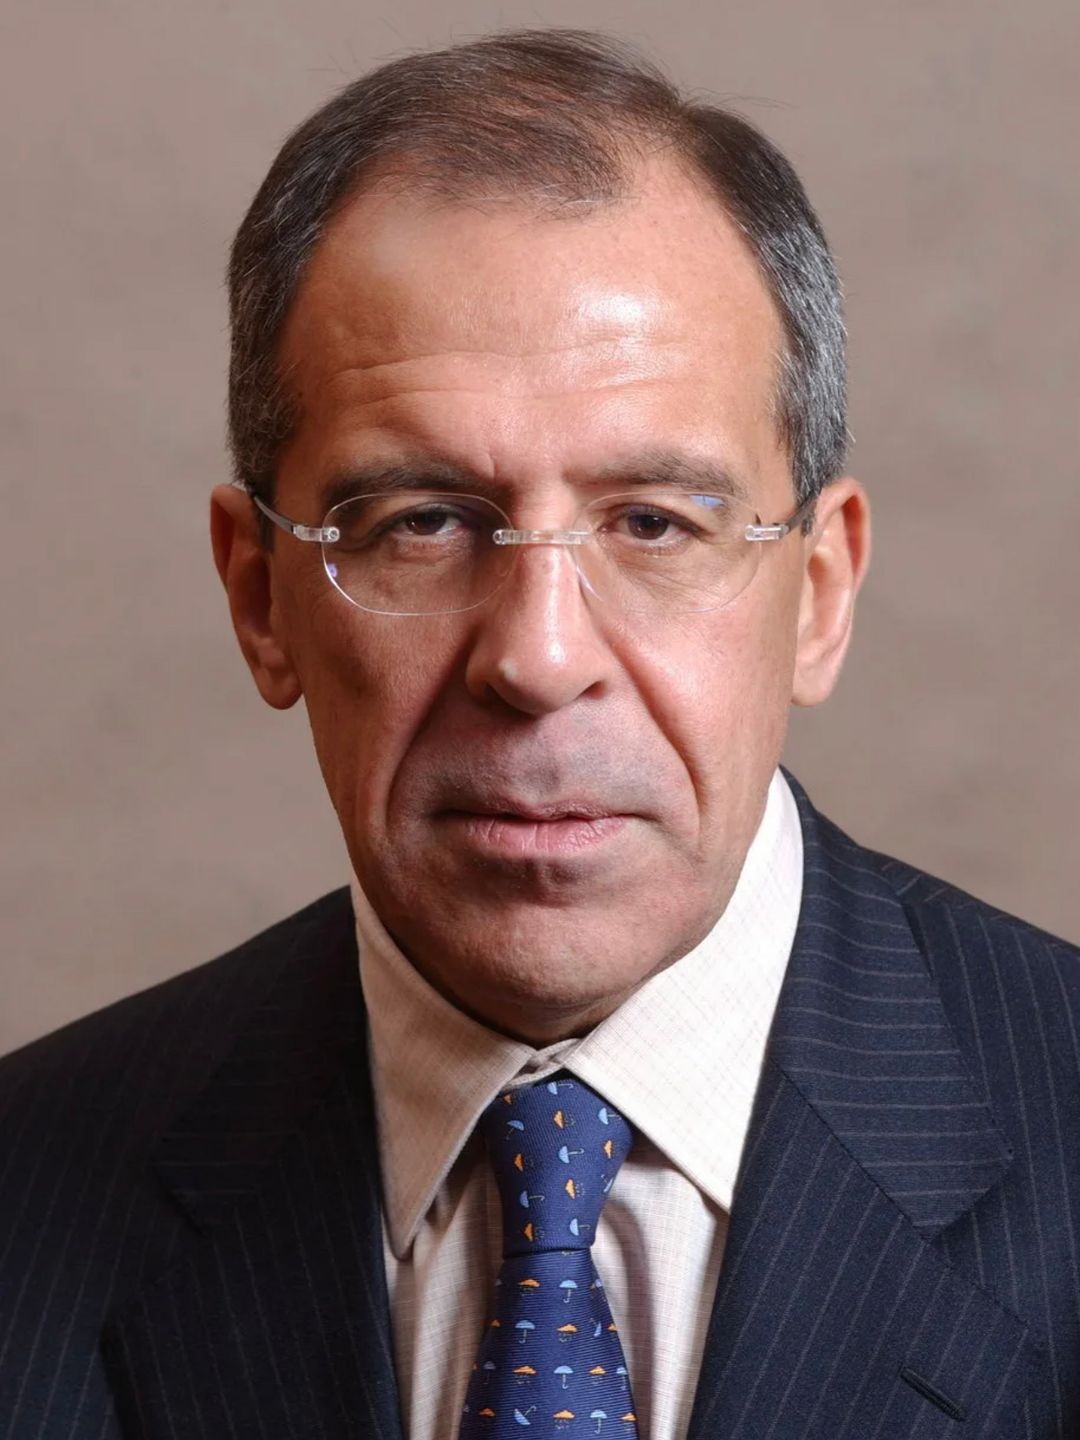 Sergey Lavrov who are his parents